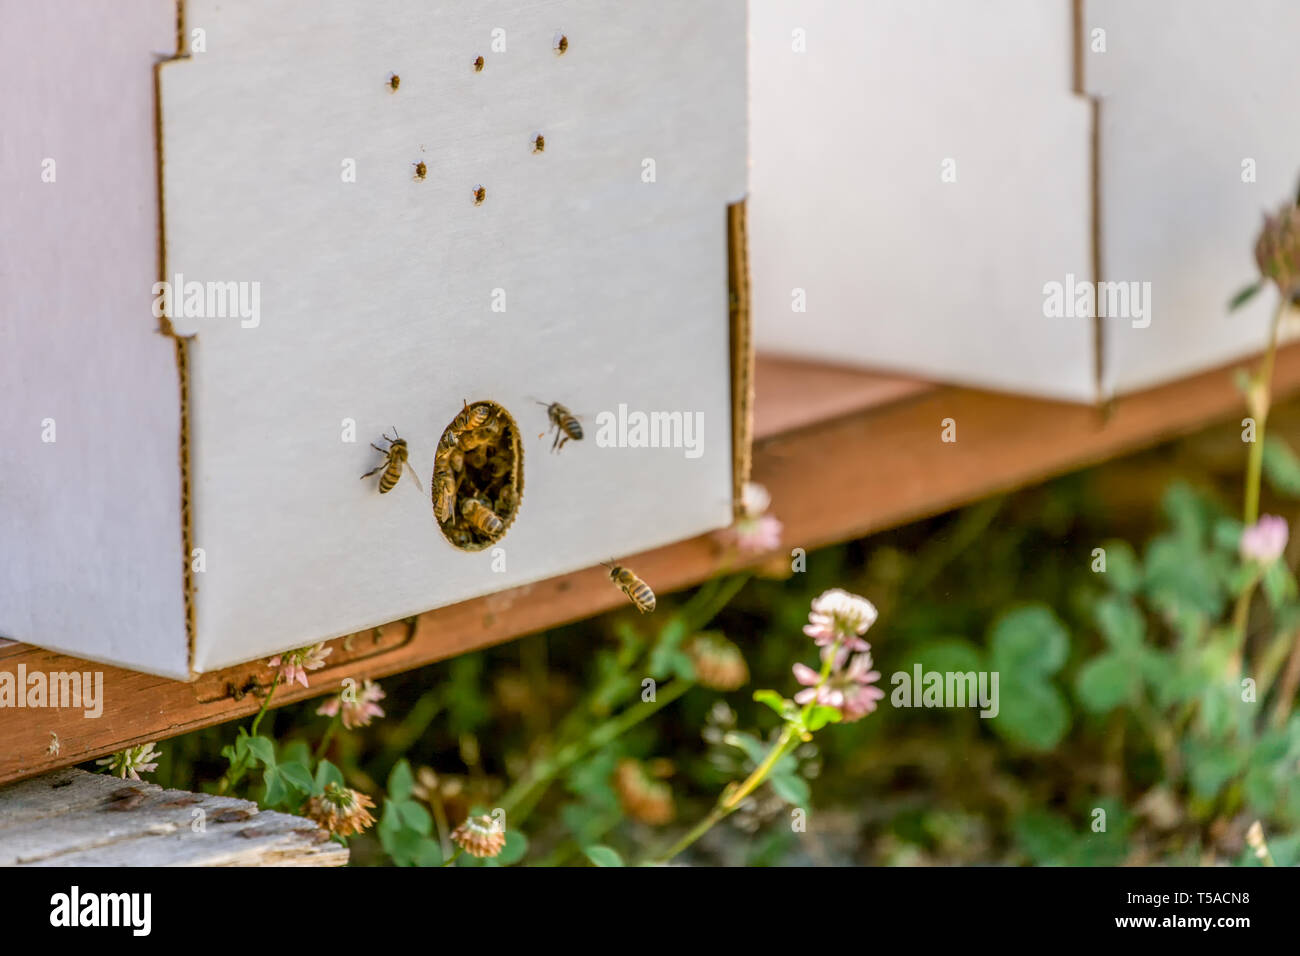 Maple Valley, Washington, USA.  Starter beehives with five frames, including a queen bee, next to White Lawn Clover. Stock Photo